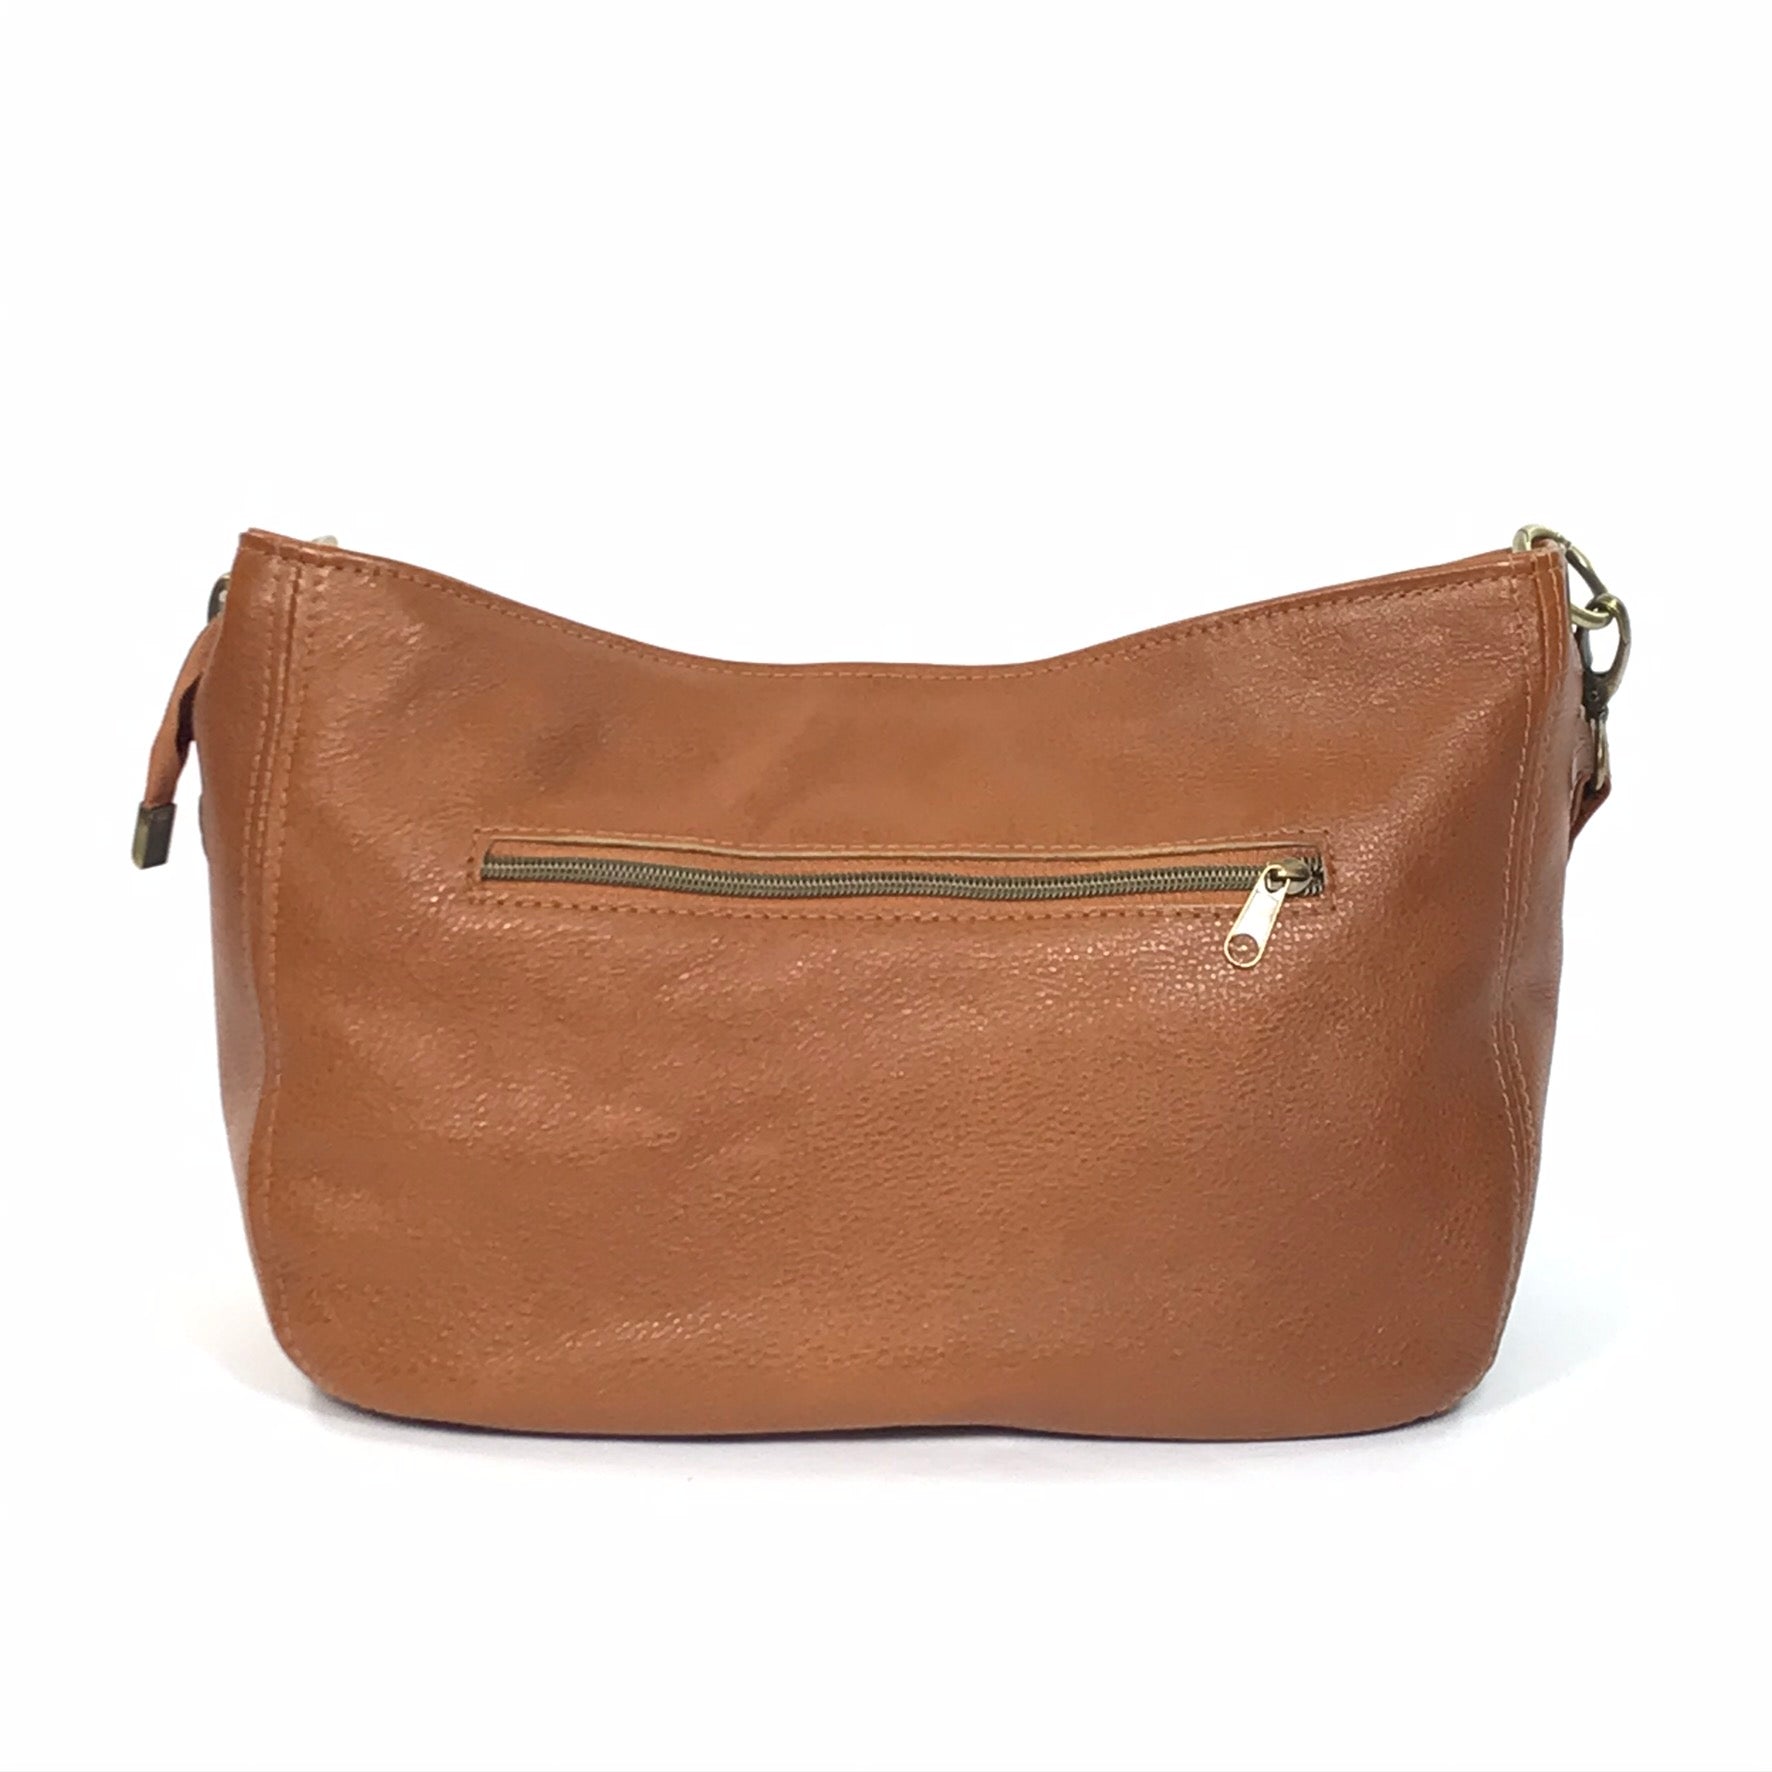 Cognac Brown Leather Slouchy Hobo back view